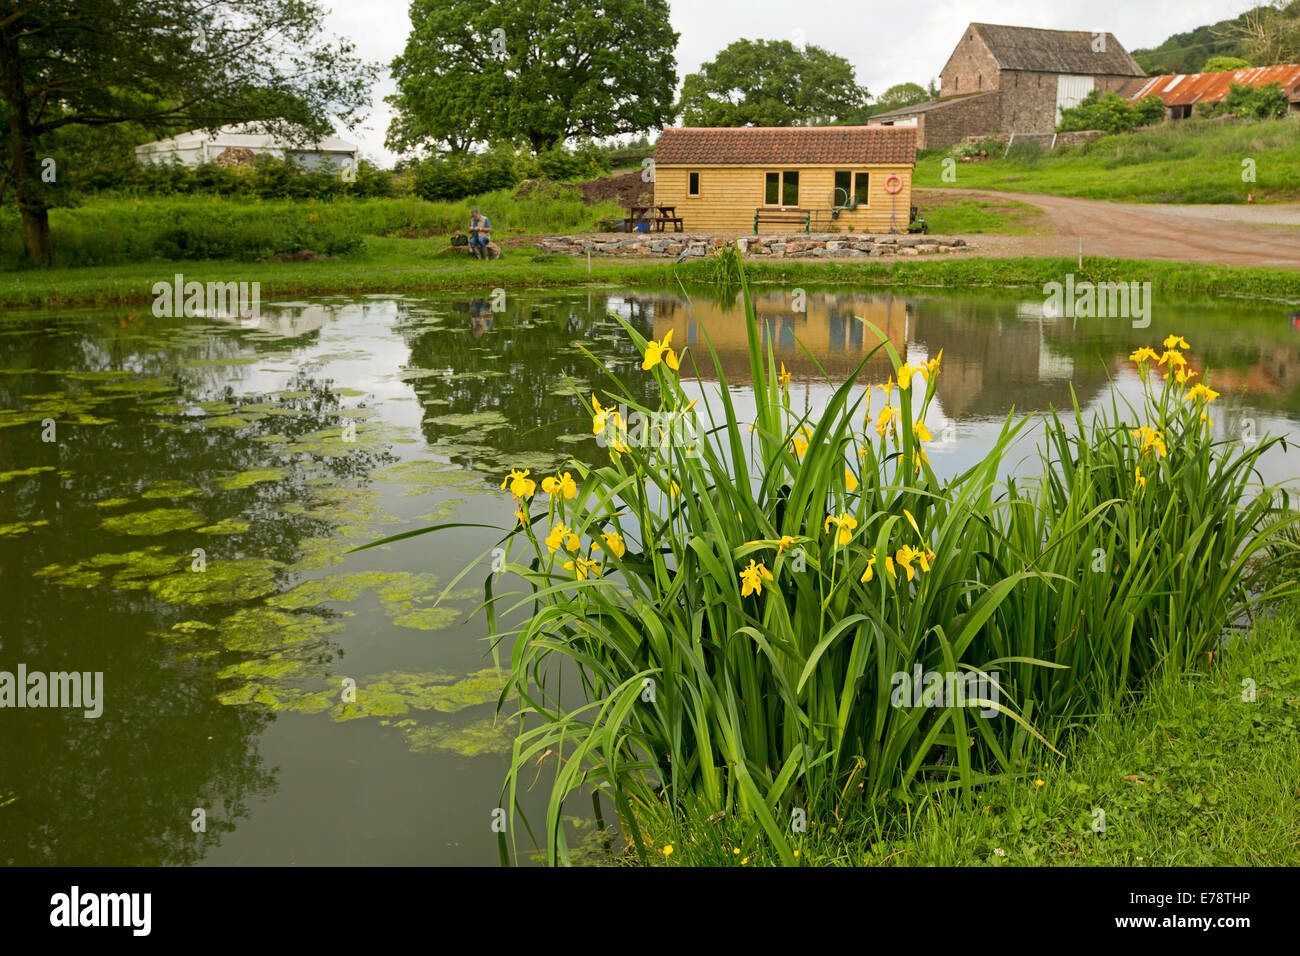 Picturesque rural landscape, angler seated by farm coarse fishing pond with wild irises, trees & barn reflected in mirror surface of water in England Stock Photo